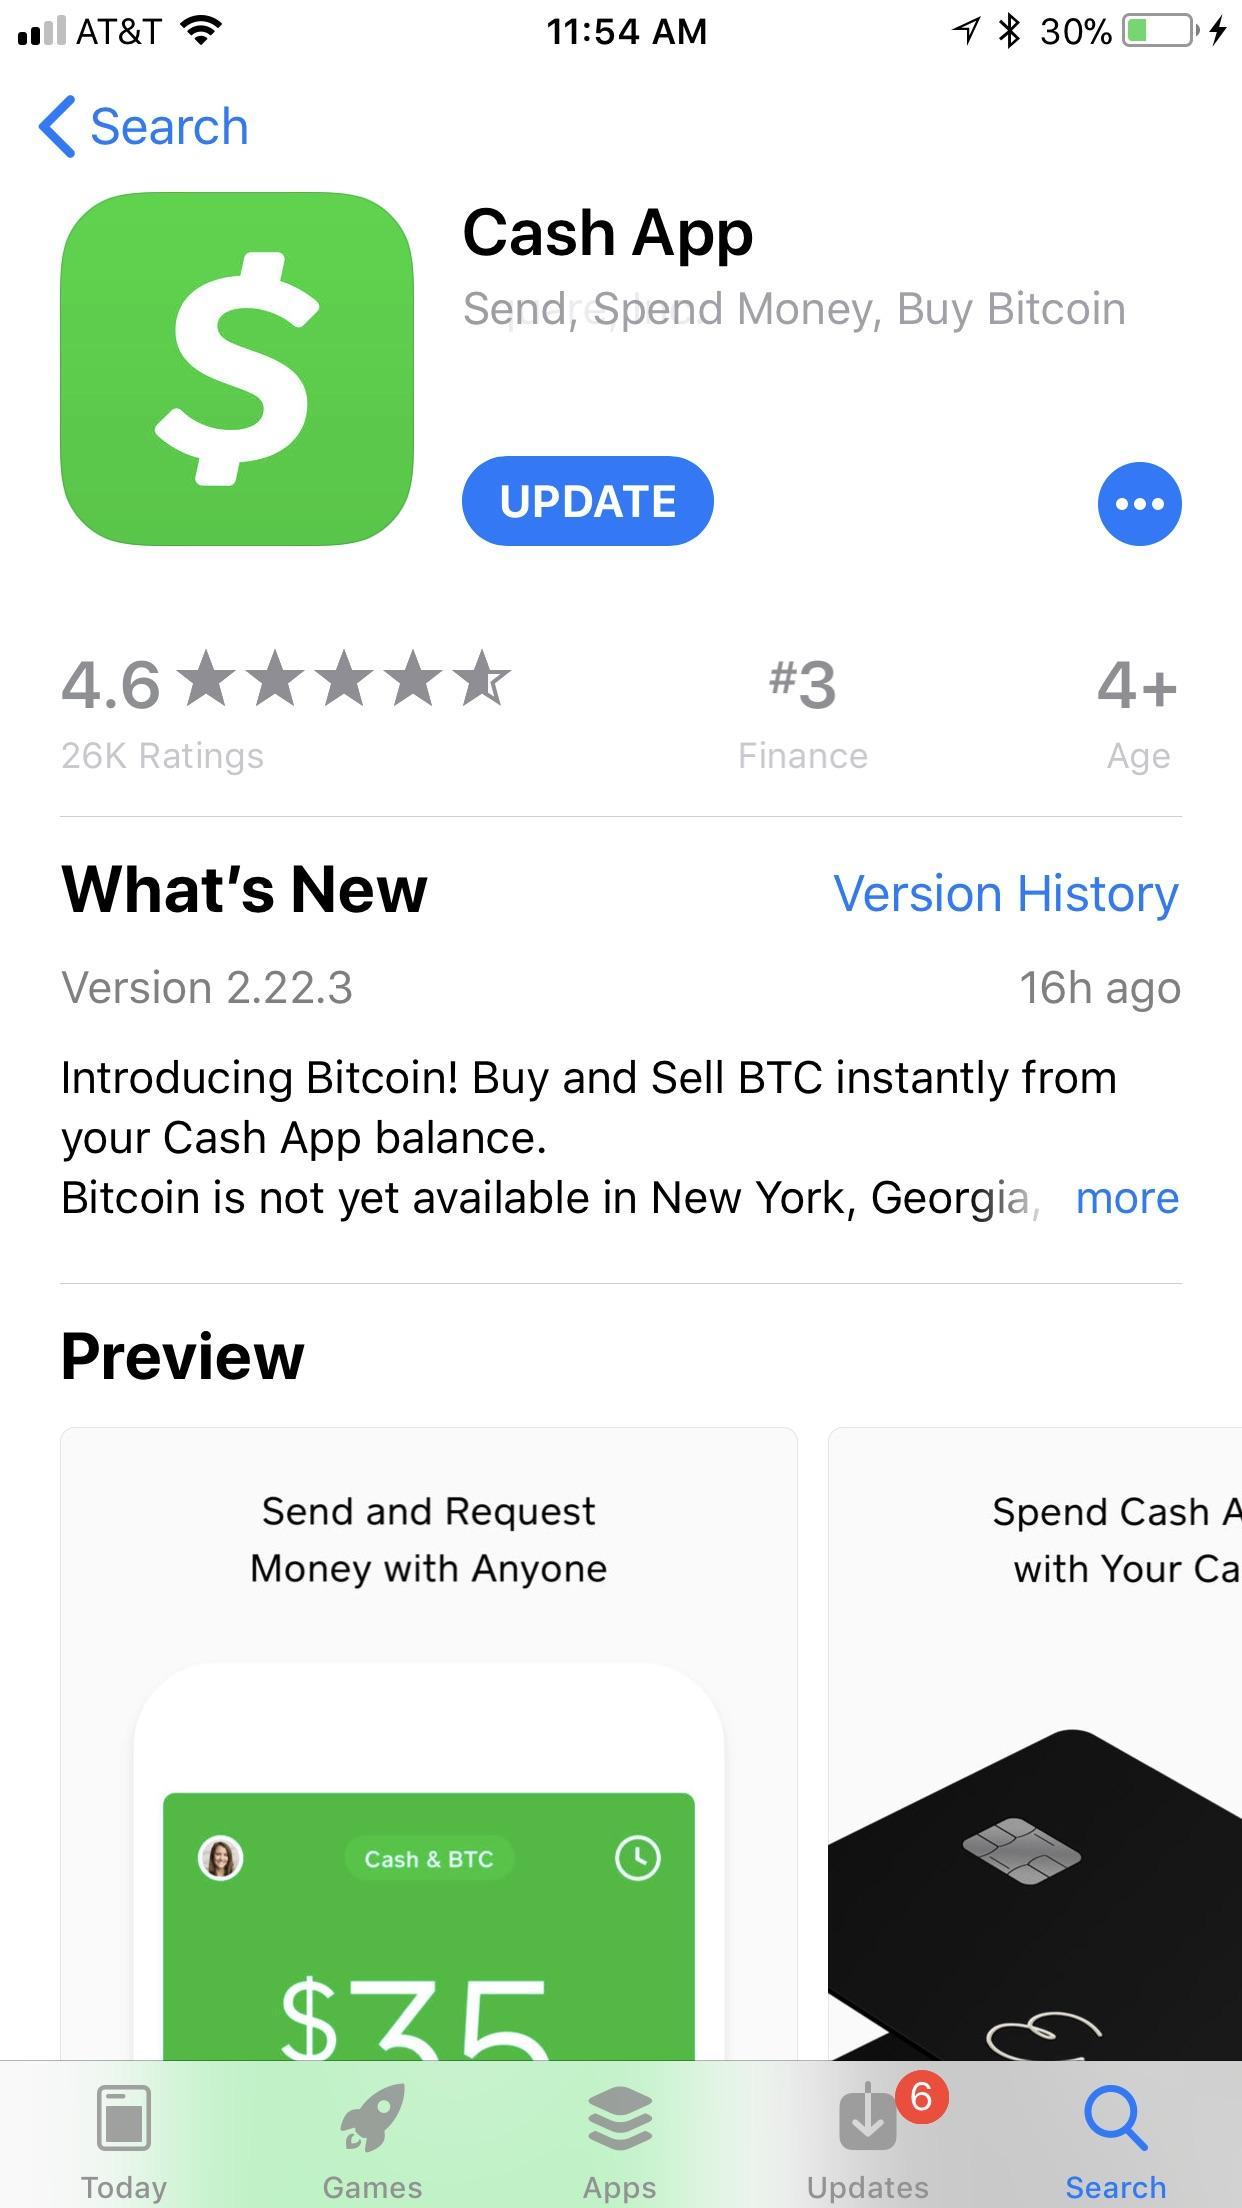 Transfer Cash App Logo - Cash App added BTC purchases, need to get them to add LTC as well ...